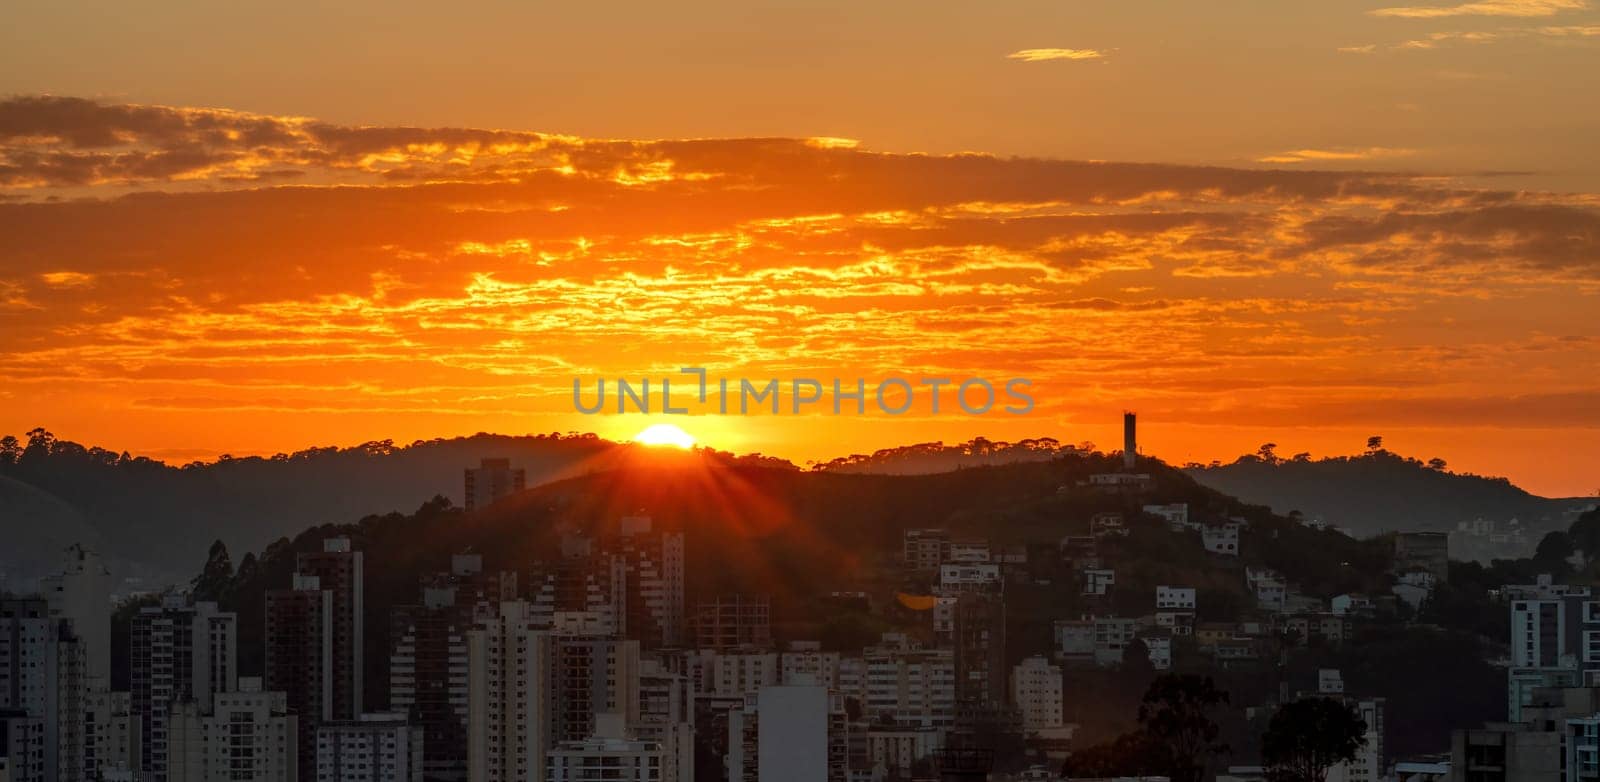 Dawn Breaks over the City with Sun Emerging from Mountain Horizon by FerradalFCG